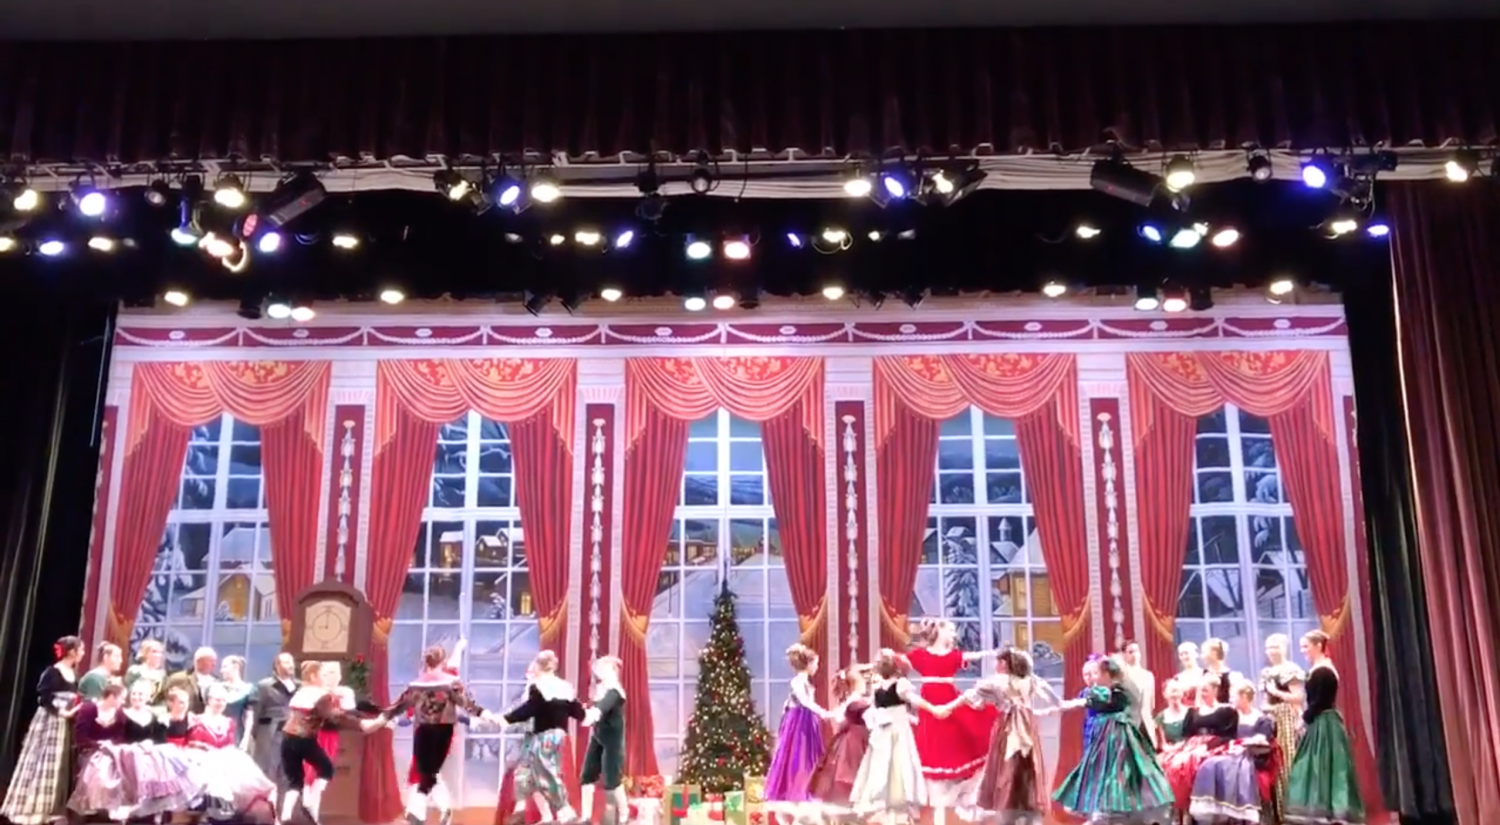 Westport+Academy+of+Dance+hosts+its+annual+production+of+the+Nutcracker